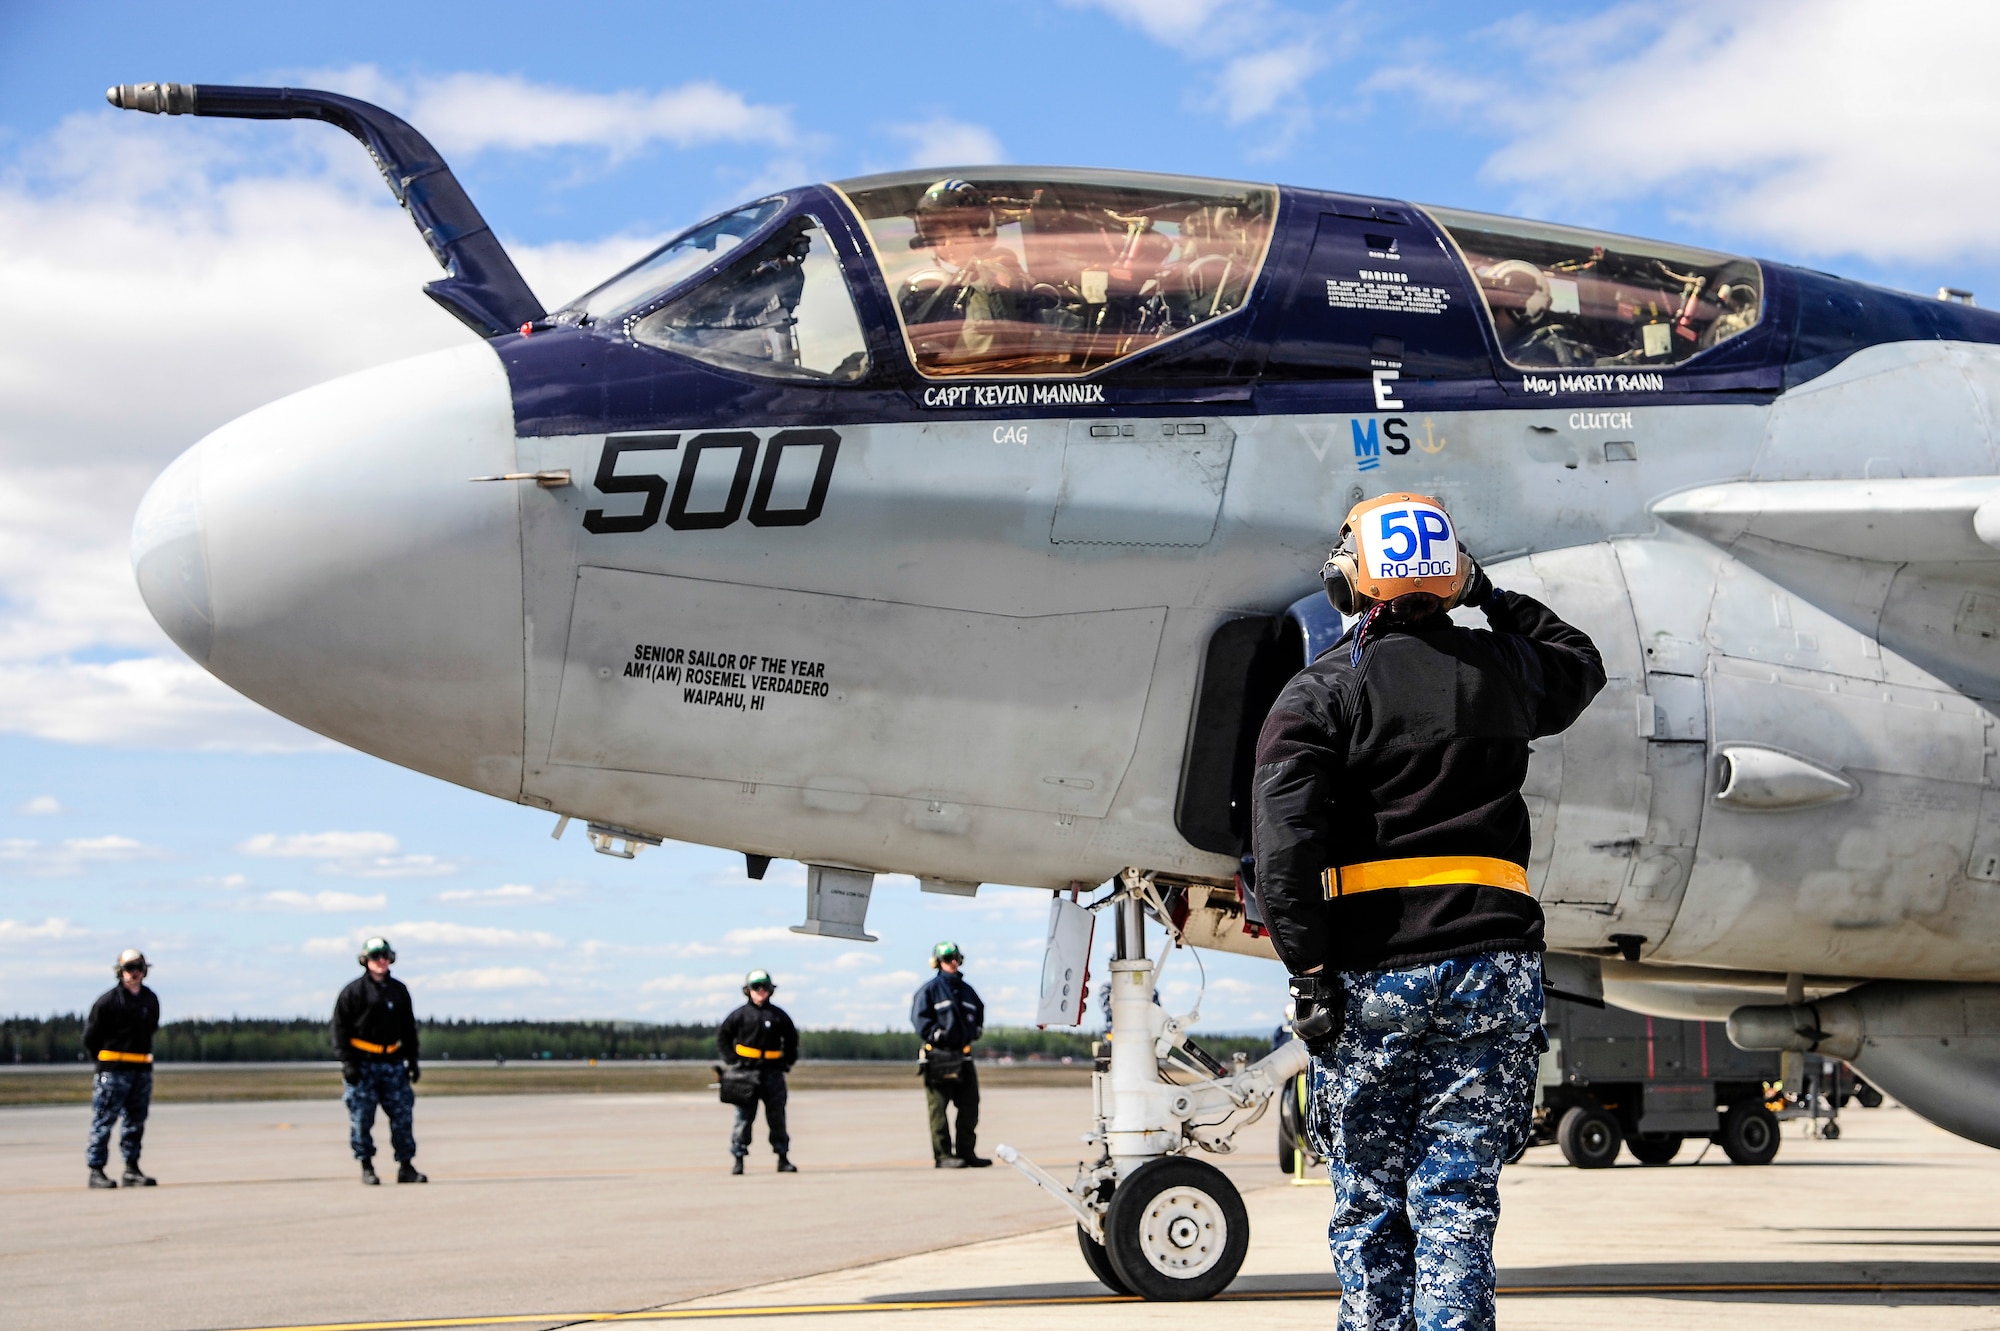 A U.S. Navy EA-6B Prowler crew chief from the Electronic Attack Squadron 142, Naval Air Station Whidbey Island, Oak Harbor, Wash., salutes Navy Lt. Candice Nunley, VAQ-142 Prowler pilot, during RED FLAG-Alaska 14-1 May 22, 2014, Eielson Air Force Base, Alaska. The Prowler carries out missions by jamming enemy radar systems and gathering radio intelligence on enemy air defense systems. (U.S. Air Force photo by Senior Airman Zachary Perras/Released)